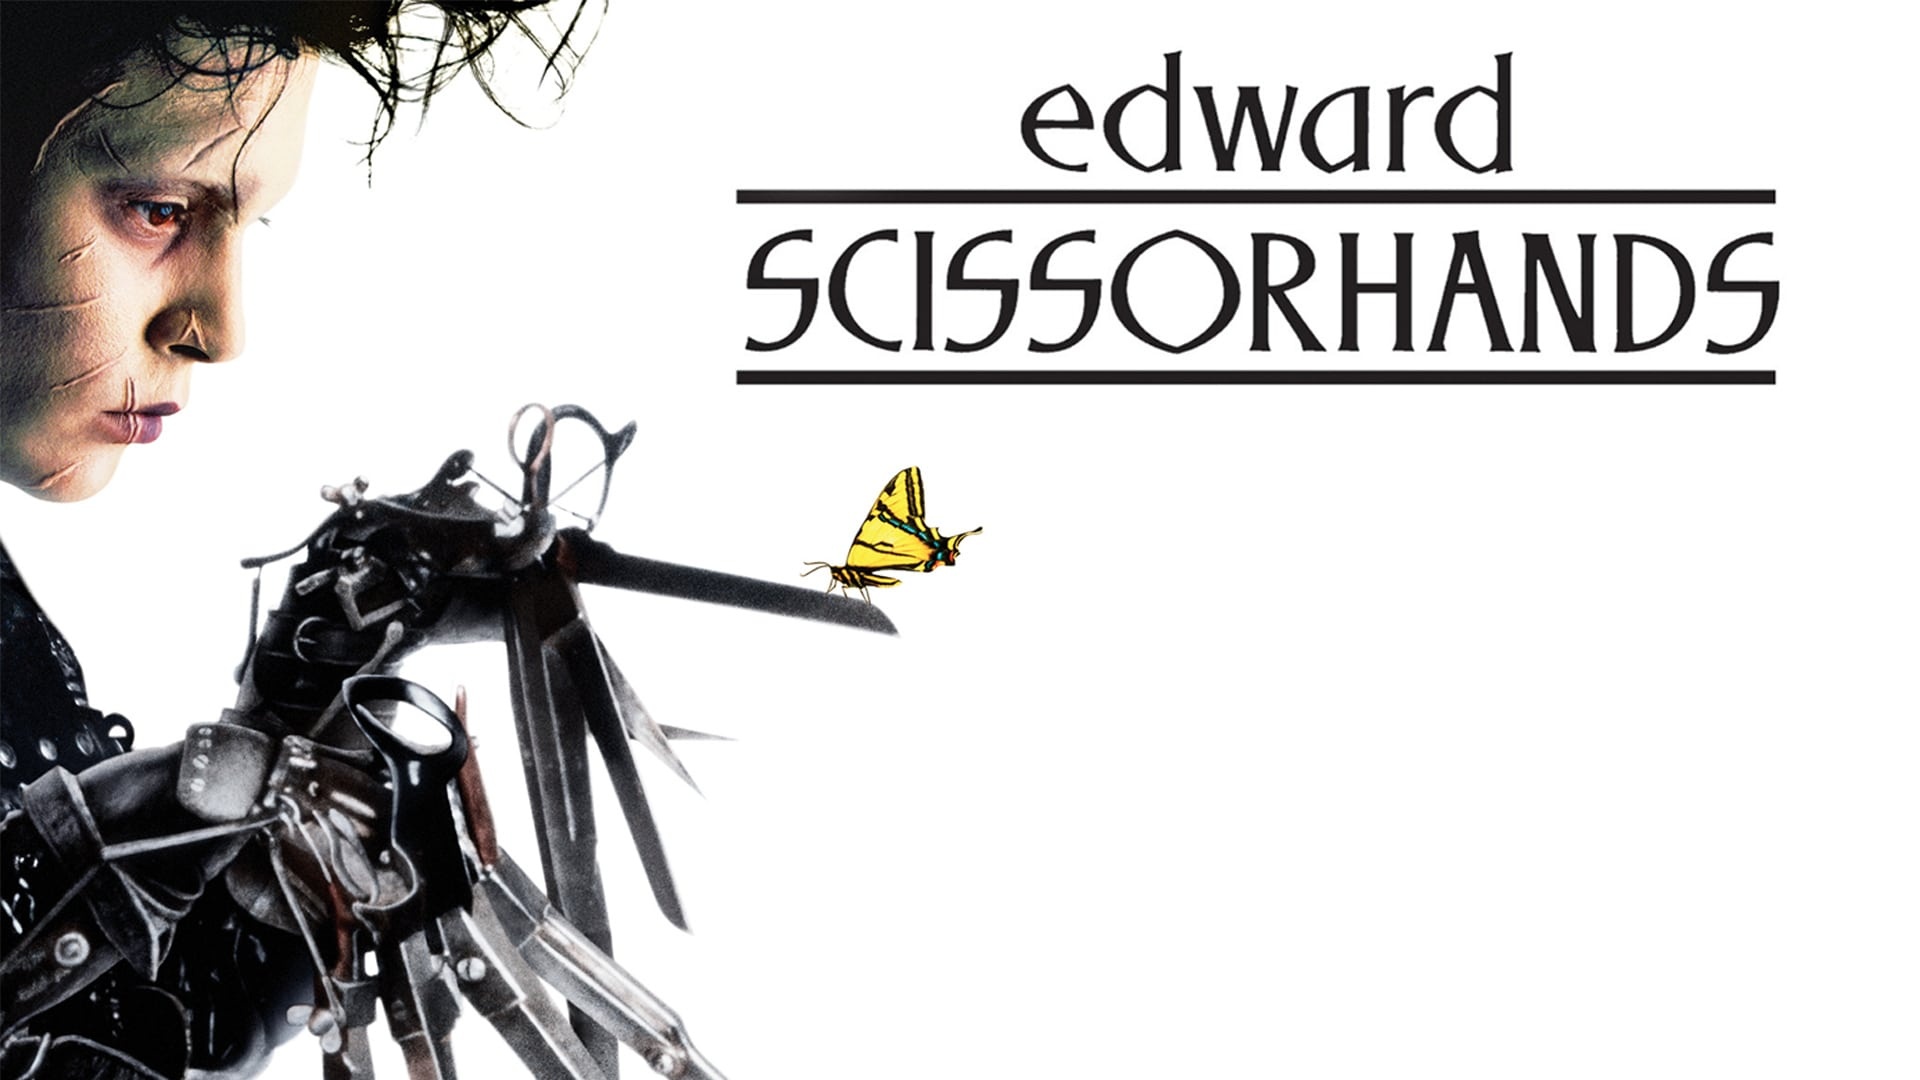 Edward Scissorhands: A dark-fantasy romance film that follows the story of a humanoid that is taken in by a suburban family as a young man. 1920x1080 Full HD Wallpaper.